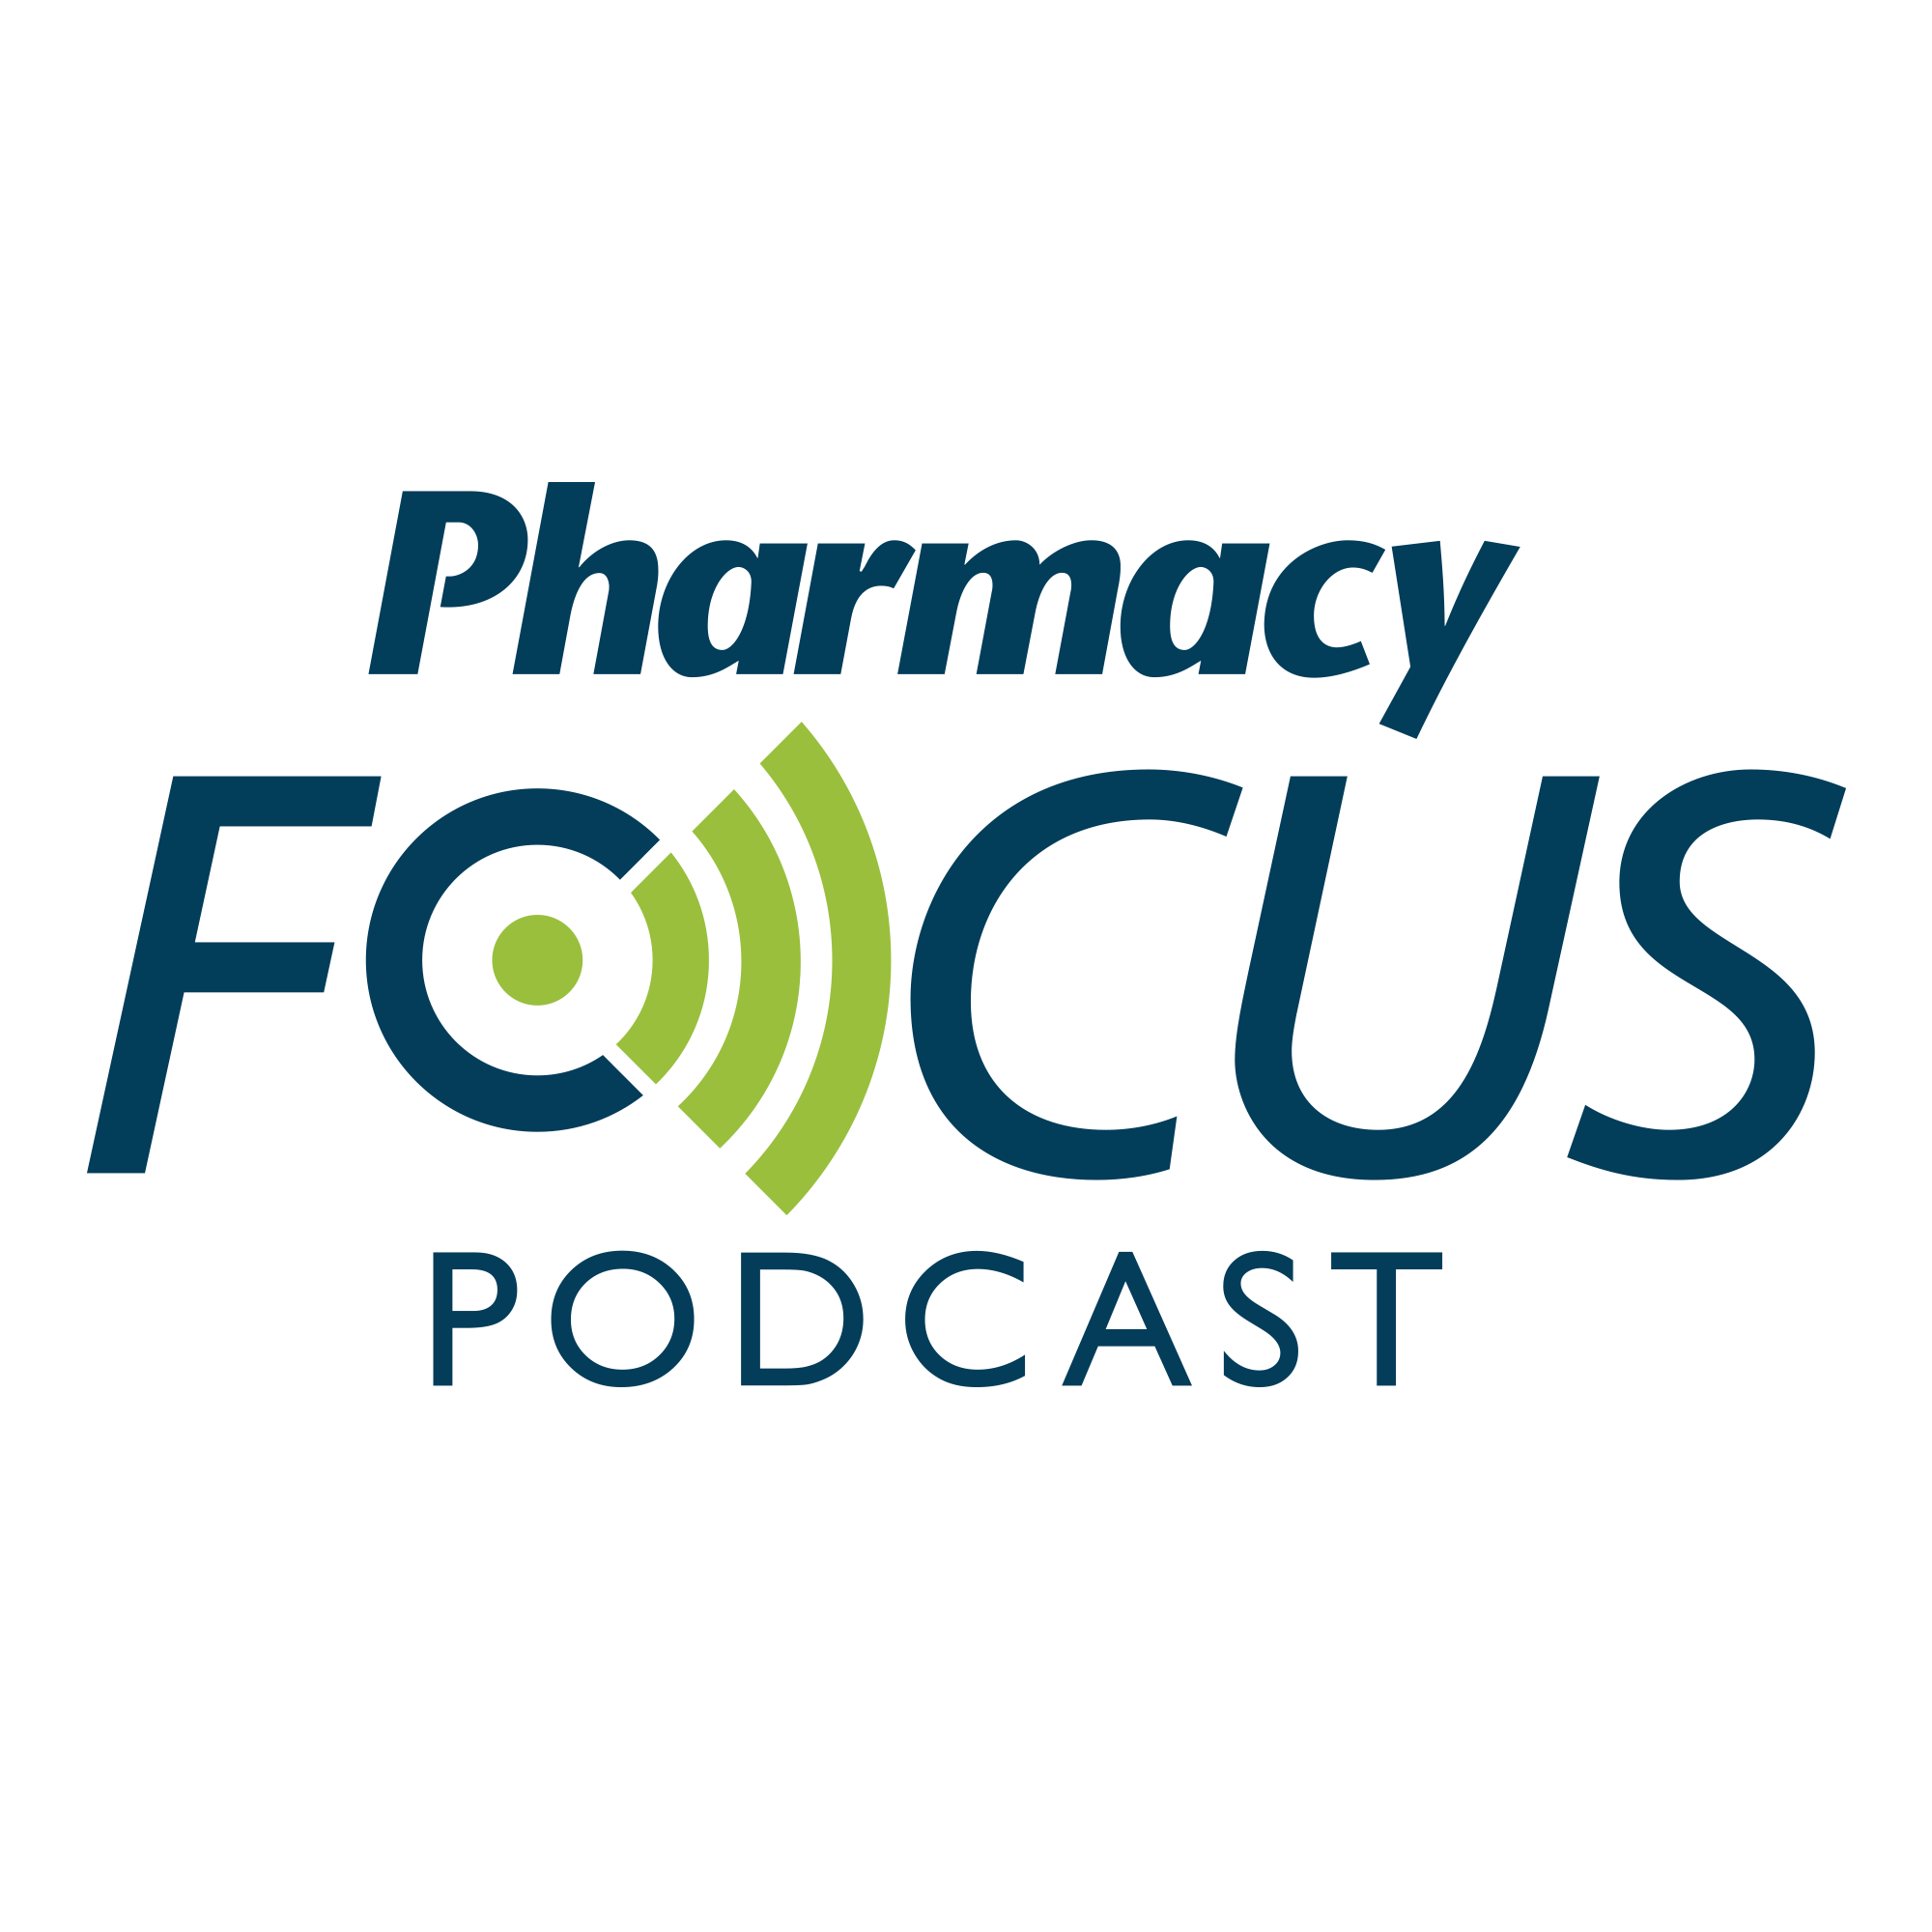 Pharmacy Focus: Conversations On Reproductive Health - Episode 2